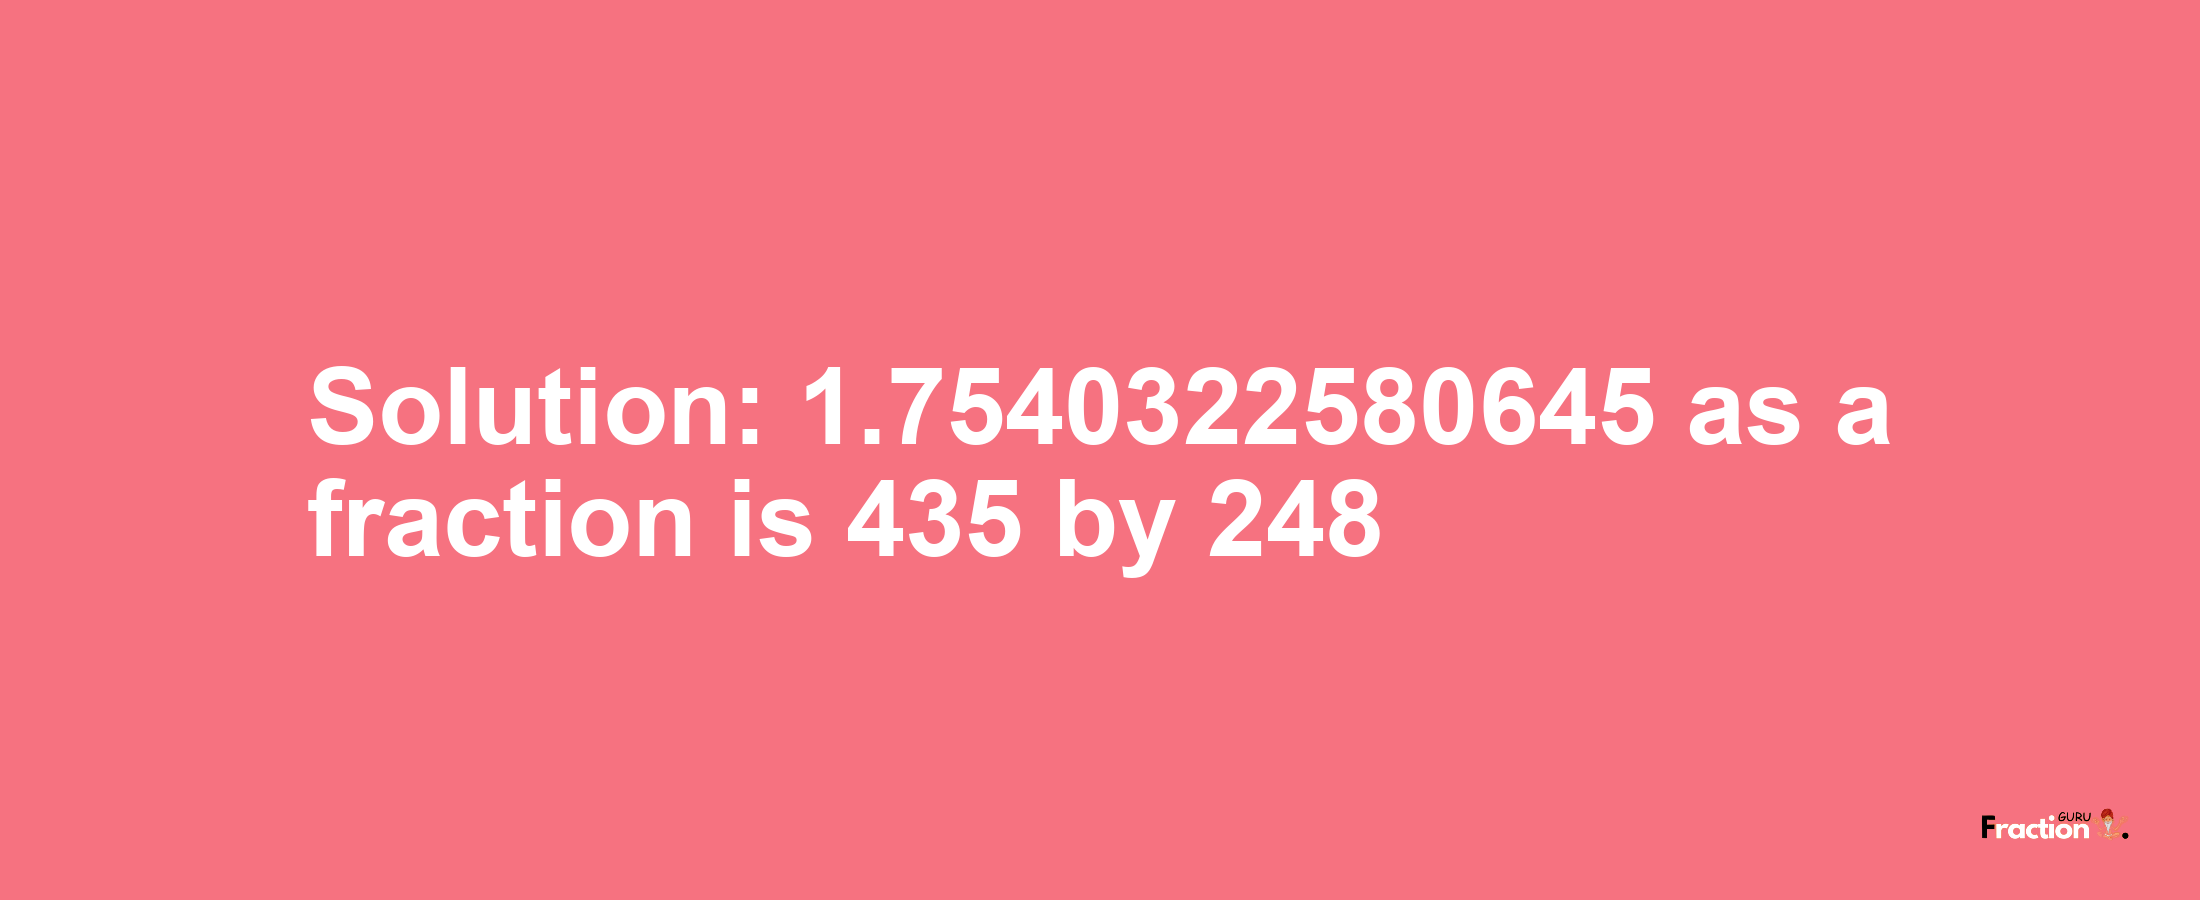 Solution:1.7540322580645 as a fraction is 435/248